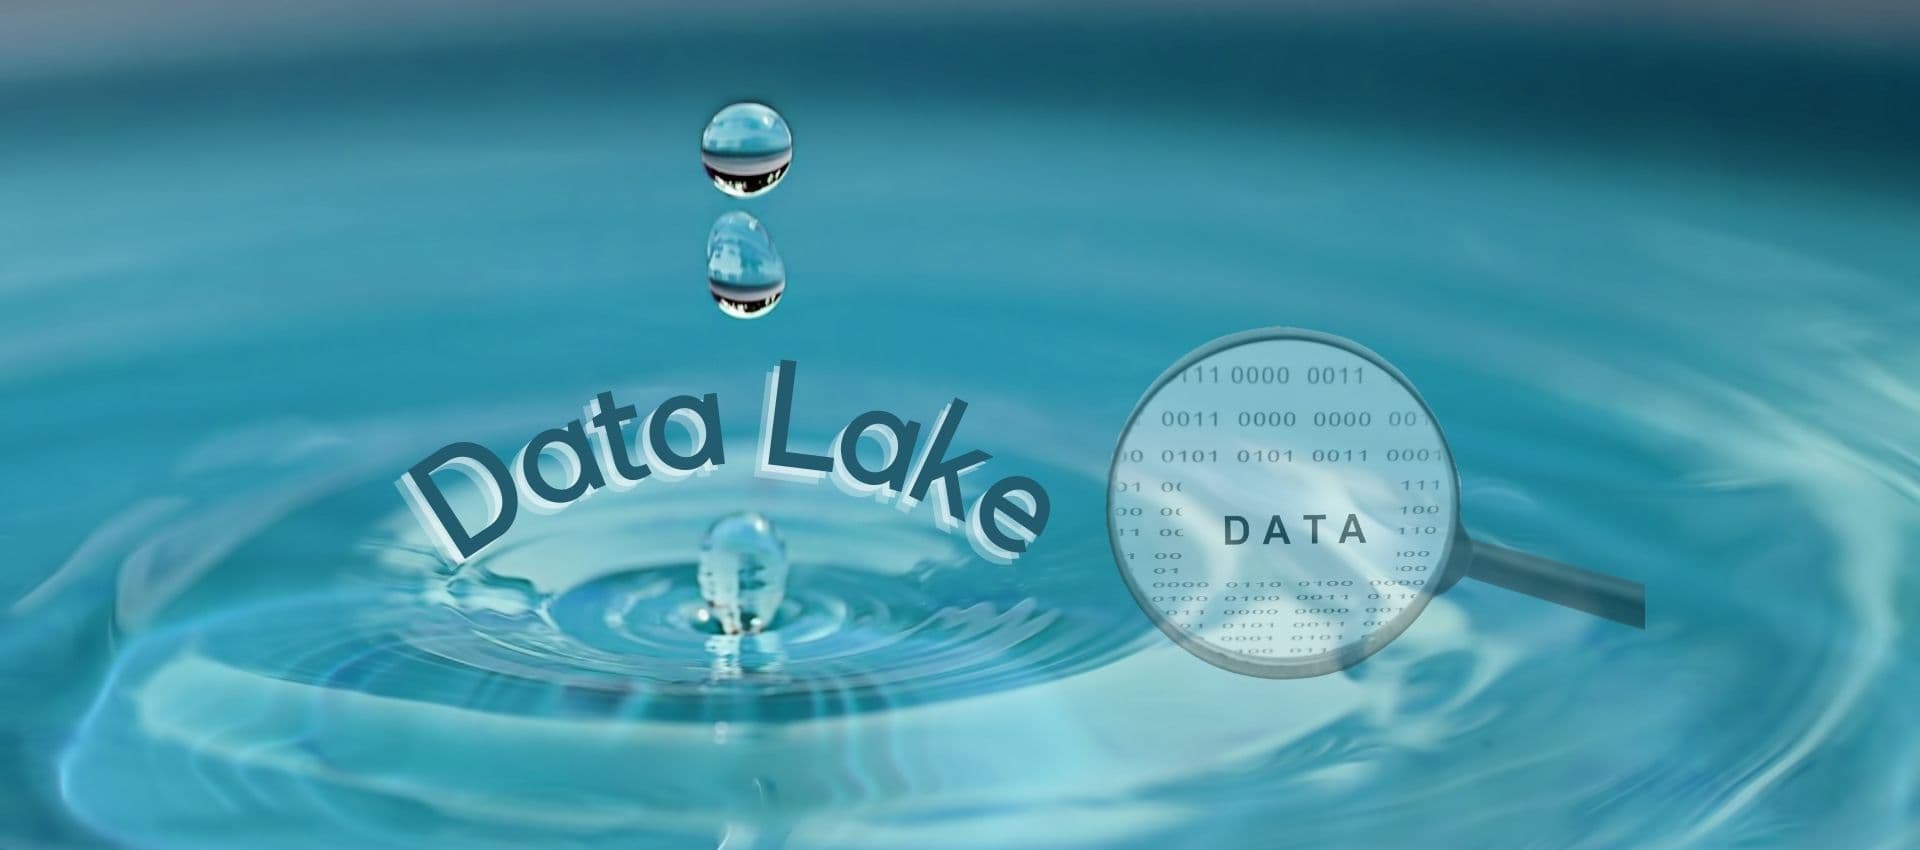 Data Lake House | The new paradigm in the data platform architecture